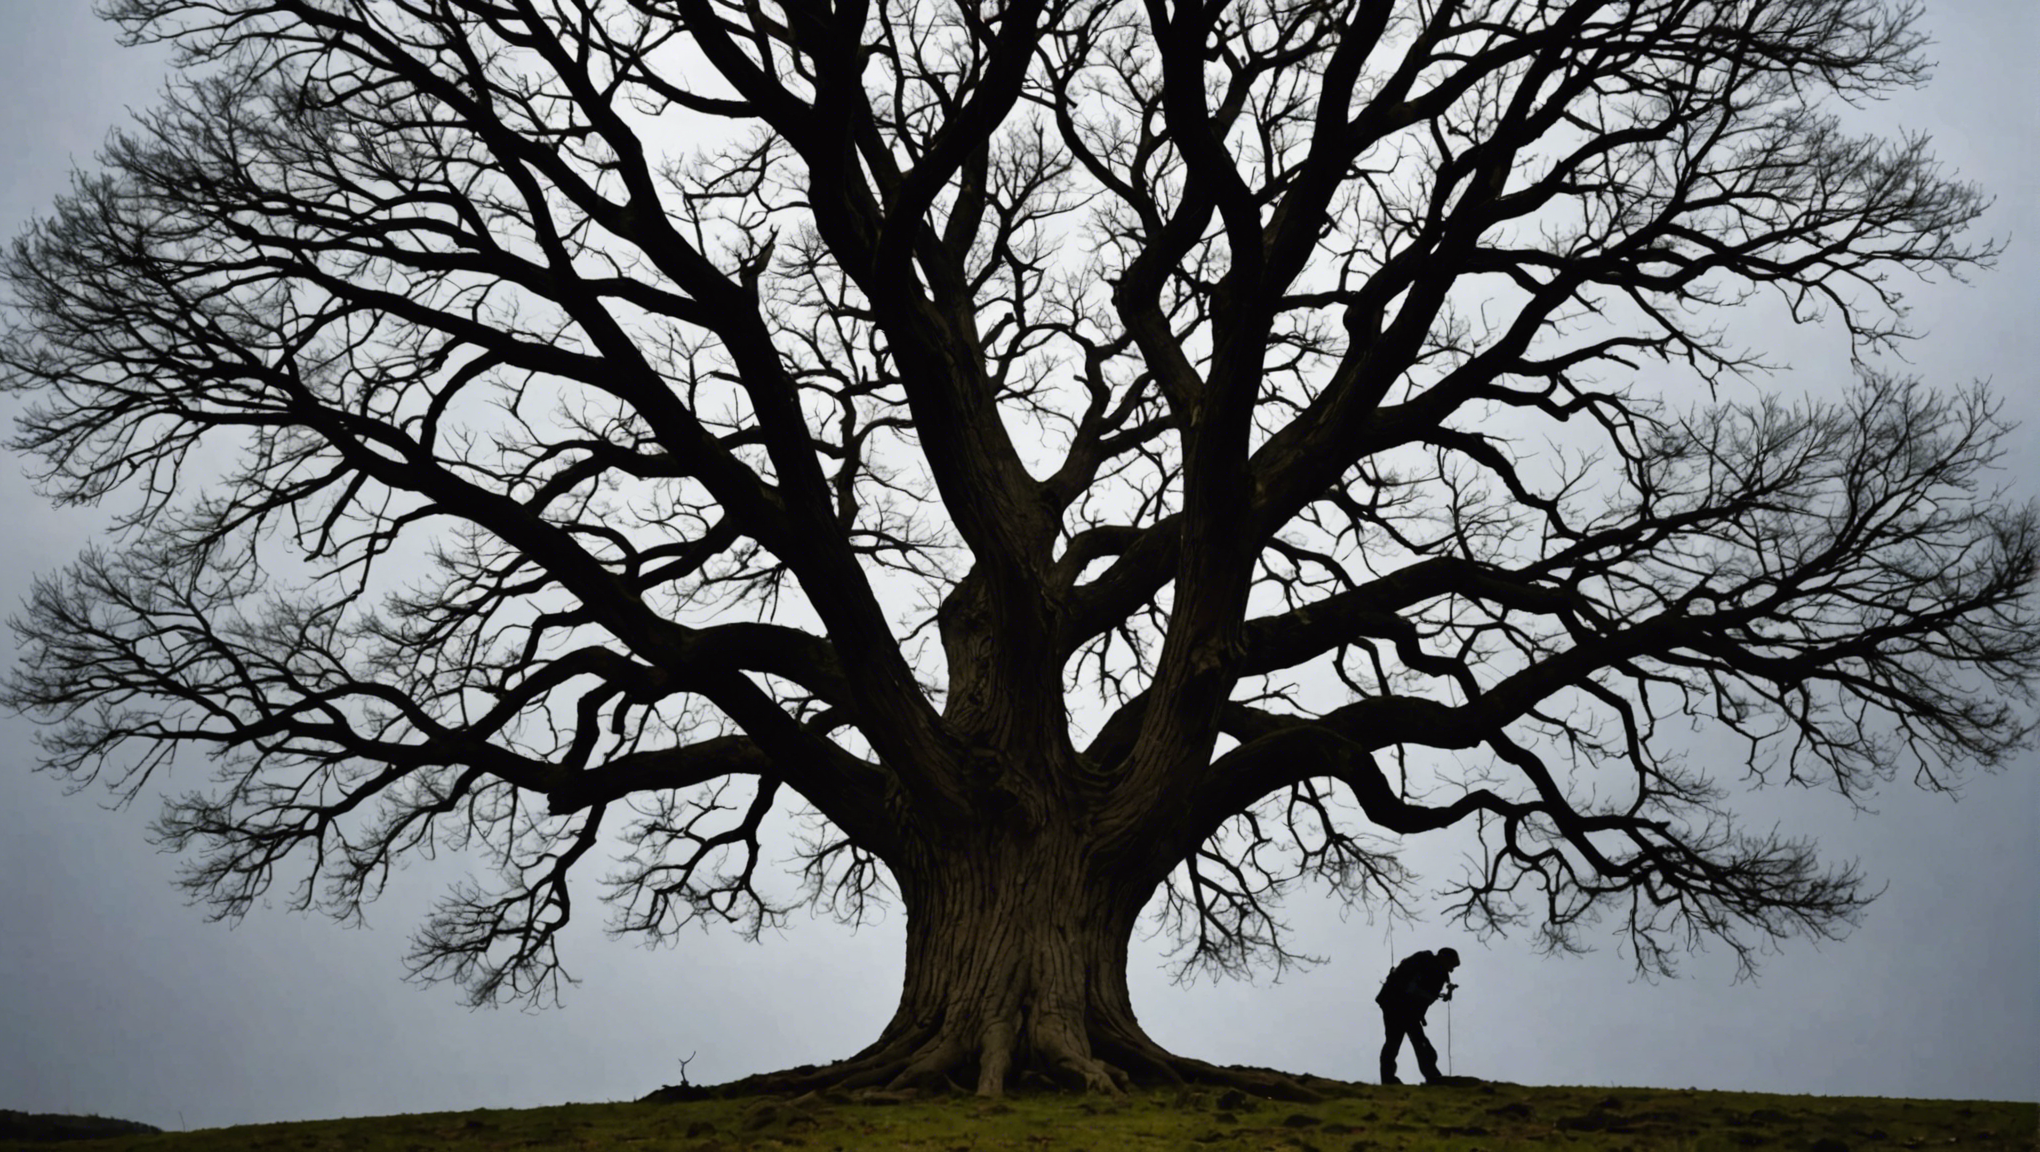 explore the significance of the tree as a symbol of life and resilience in this thought-provoking article. learn about its cultural, historical, and environmental significance.